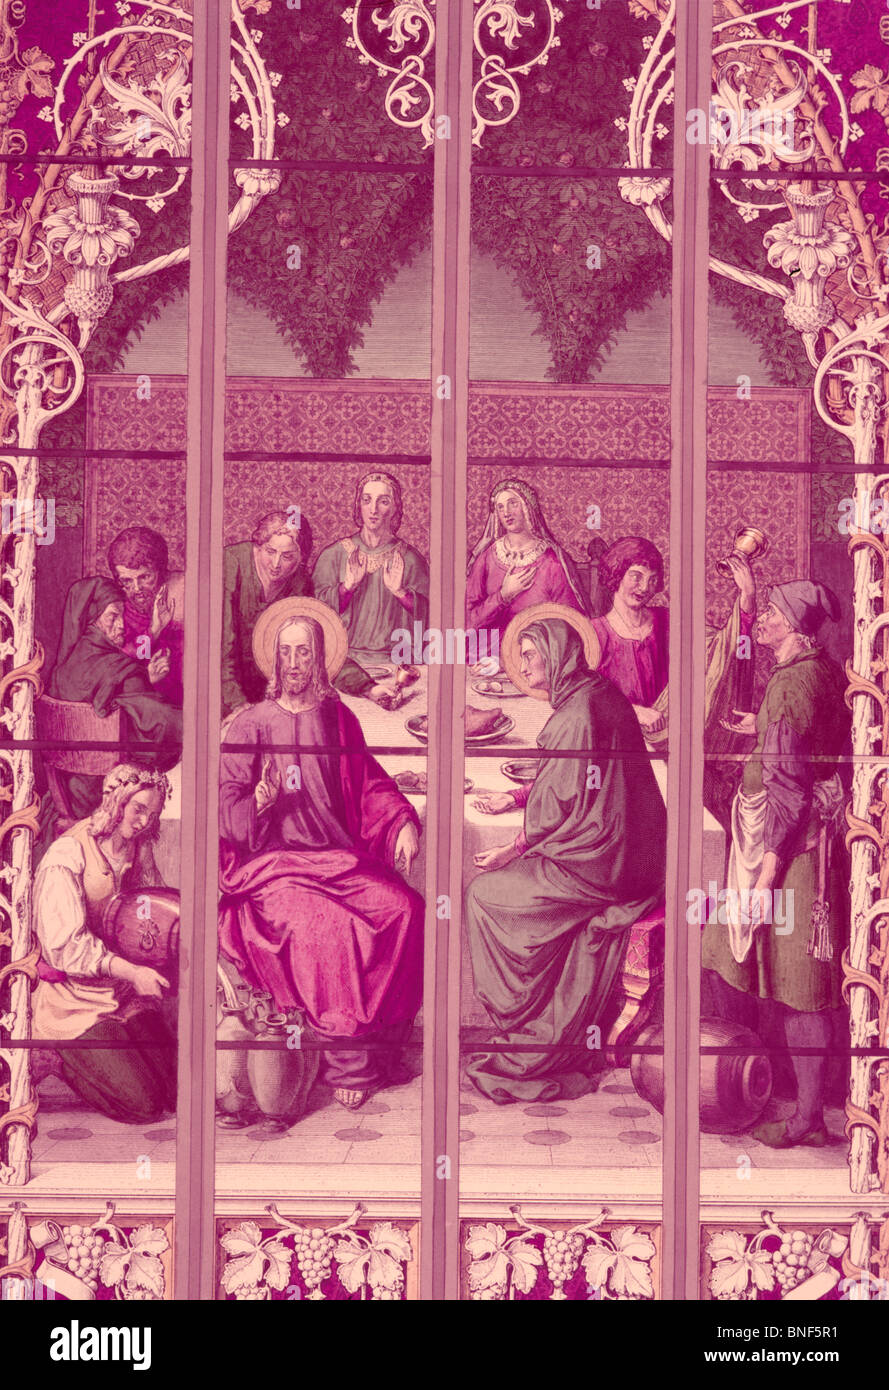 Wedding at Cana,  stained glass window,  19th Century Stock Photo